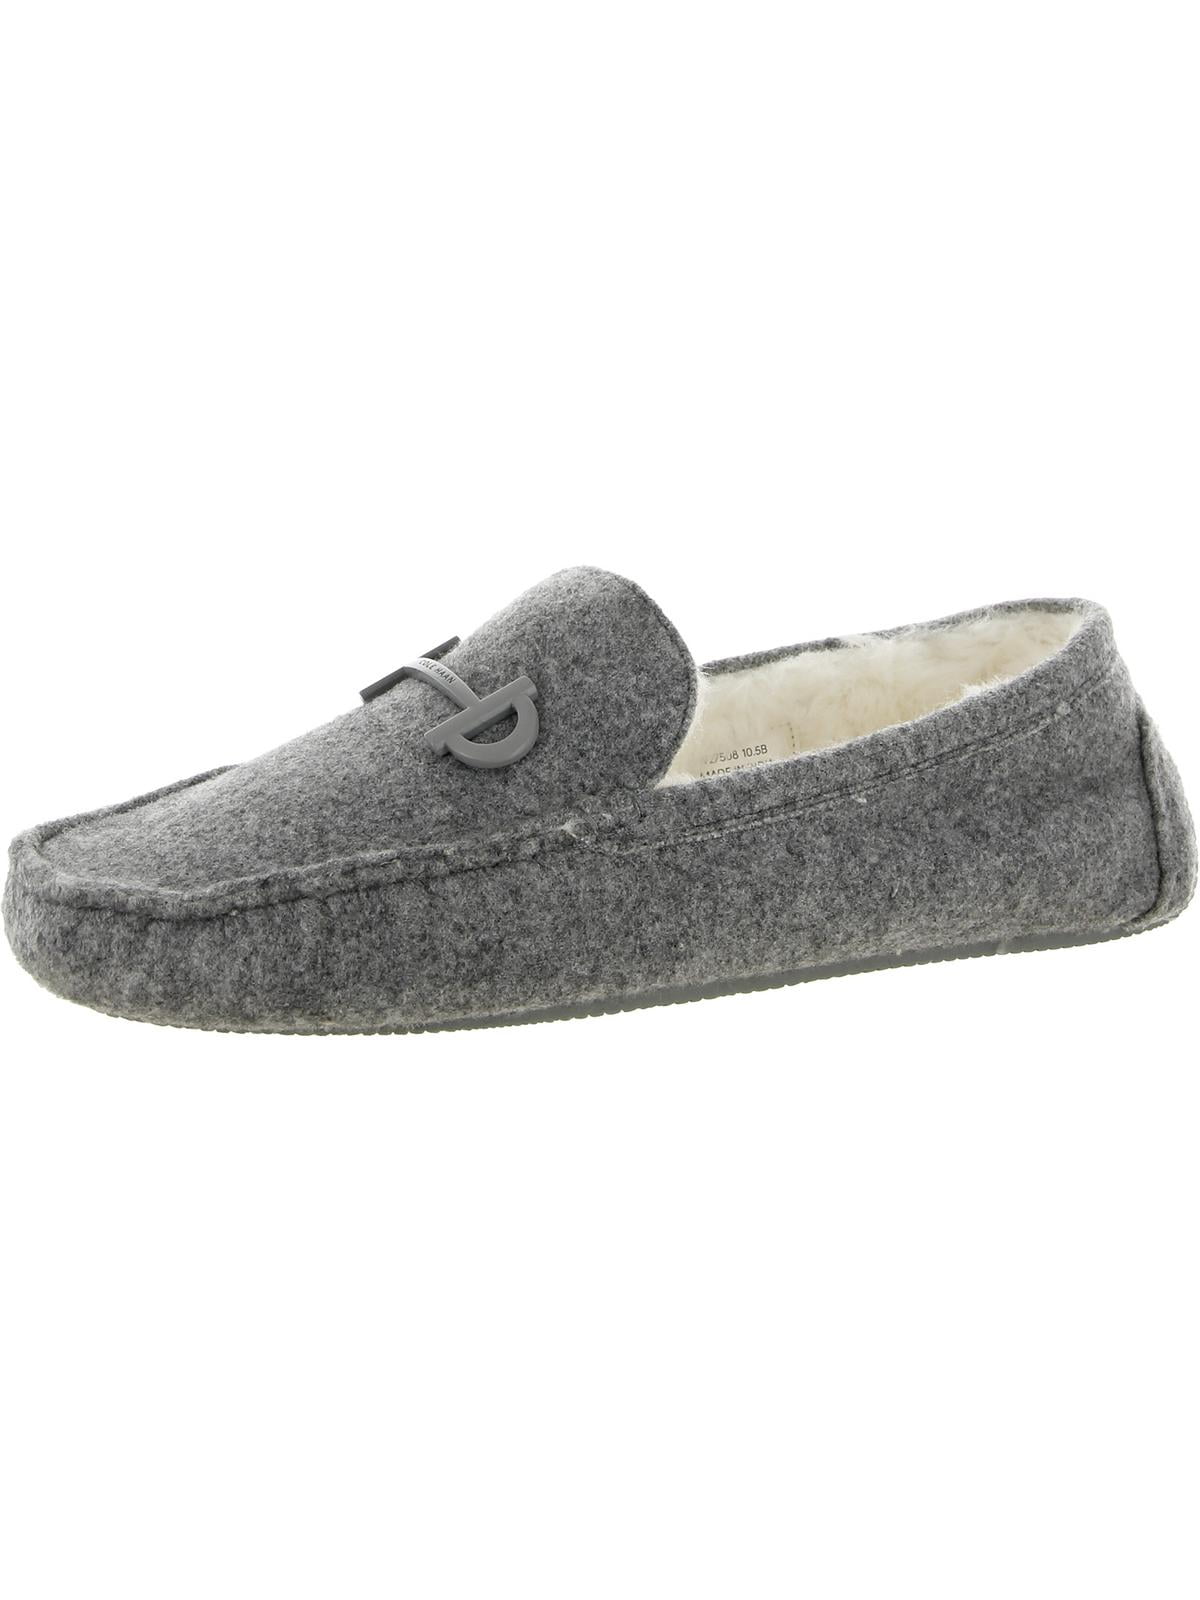 Cole Haan Womens Tully Driver Wool Slip On Driving Moccasins